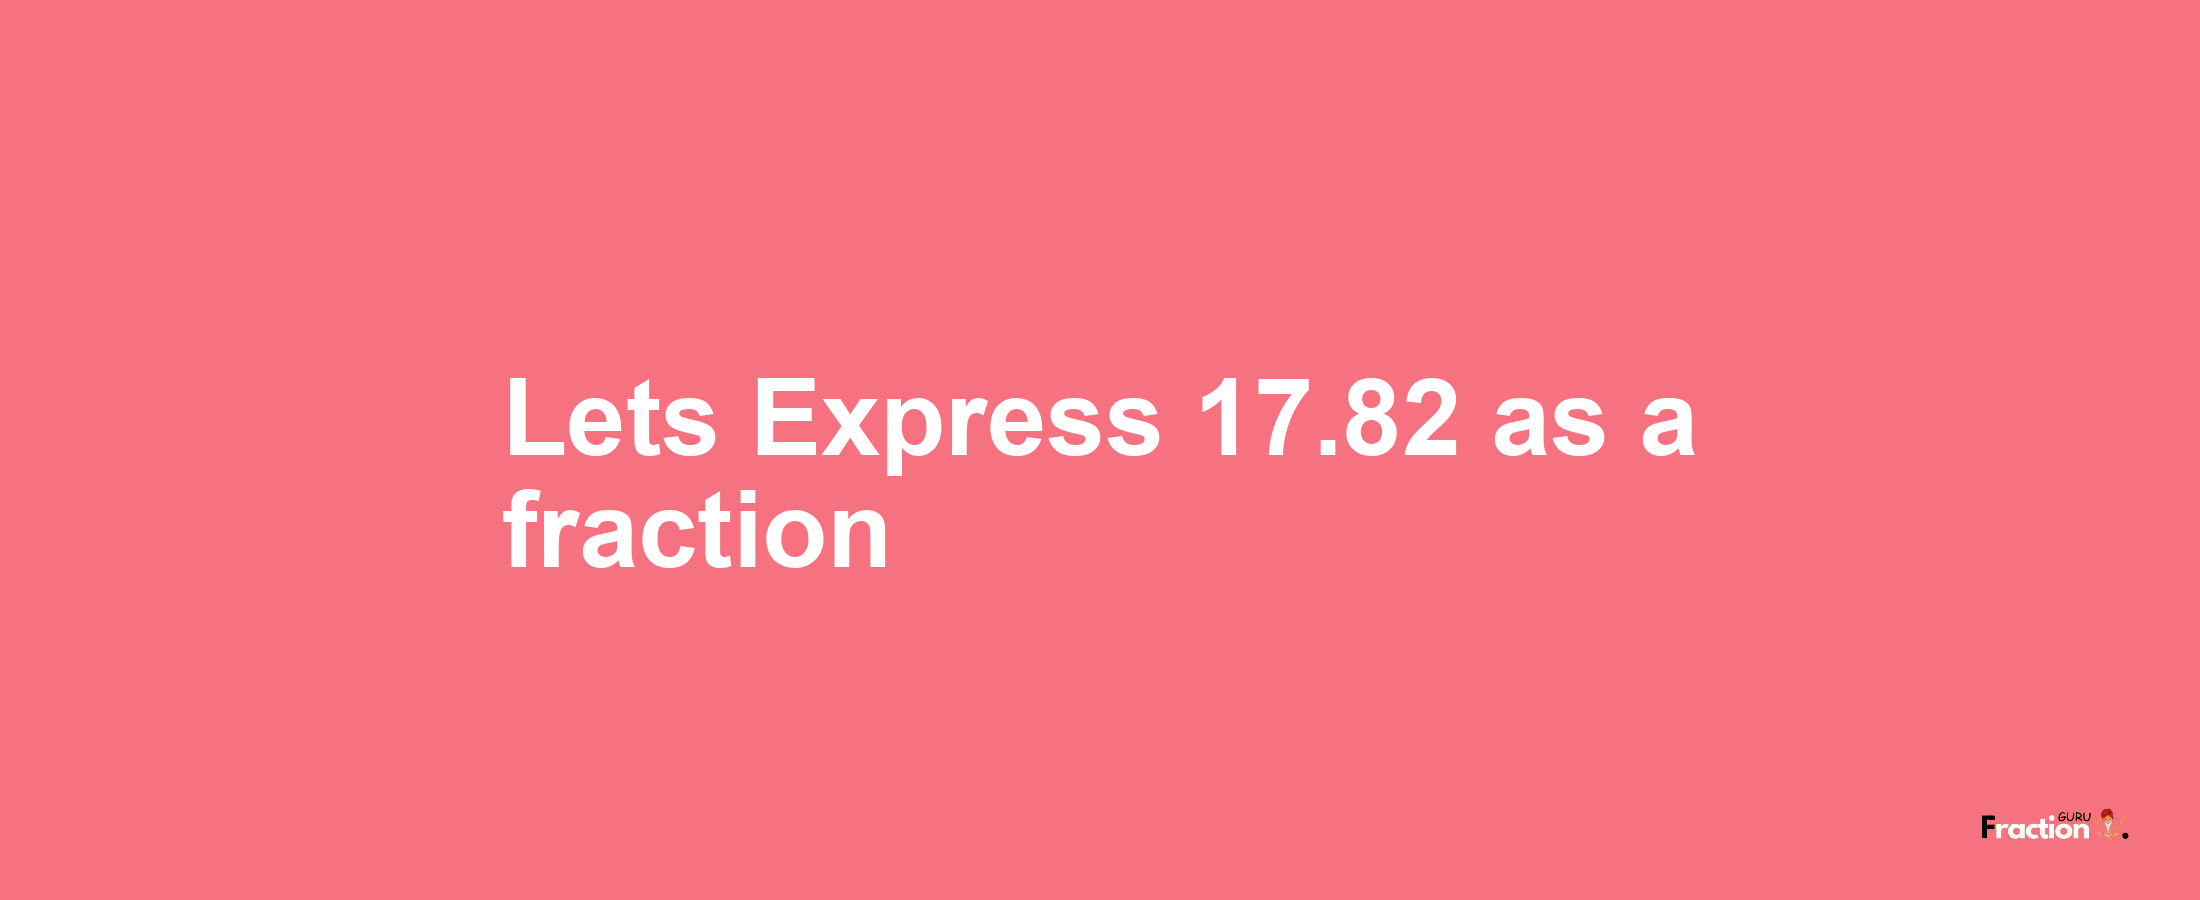 Lets Express 17.82 as afraction